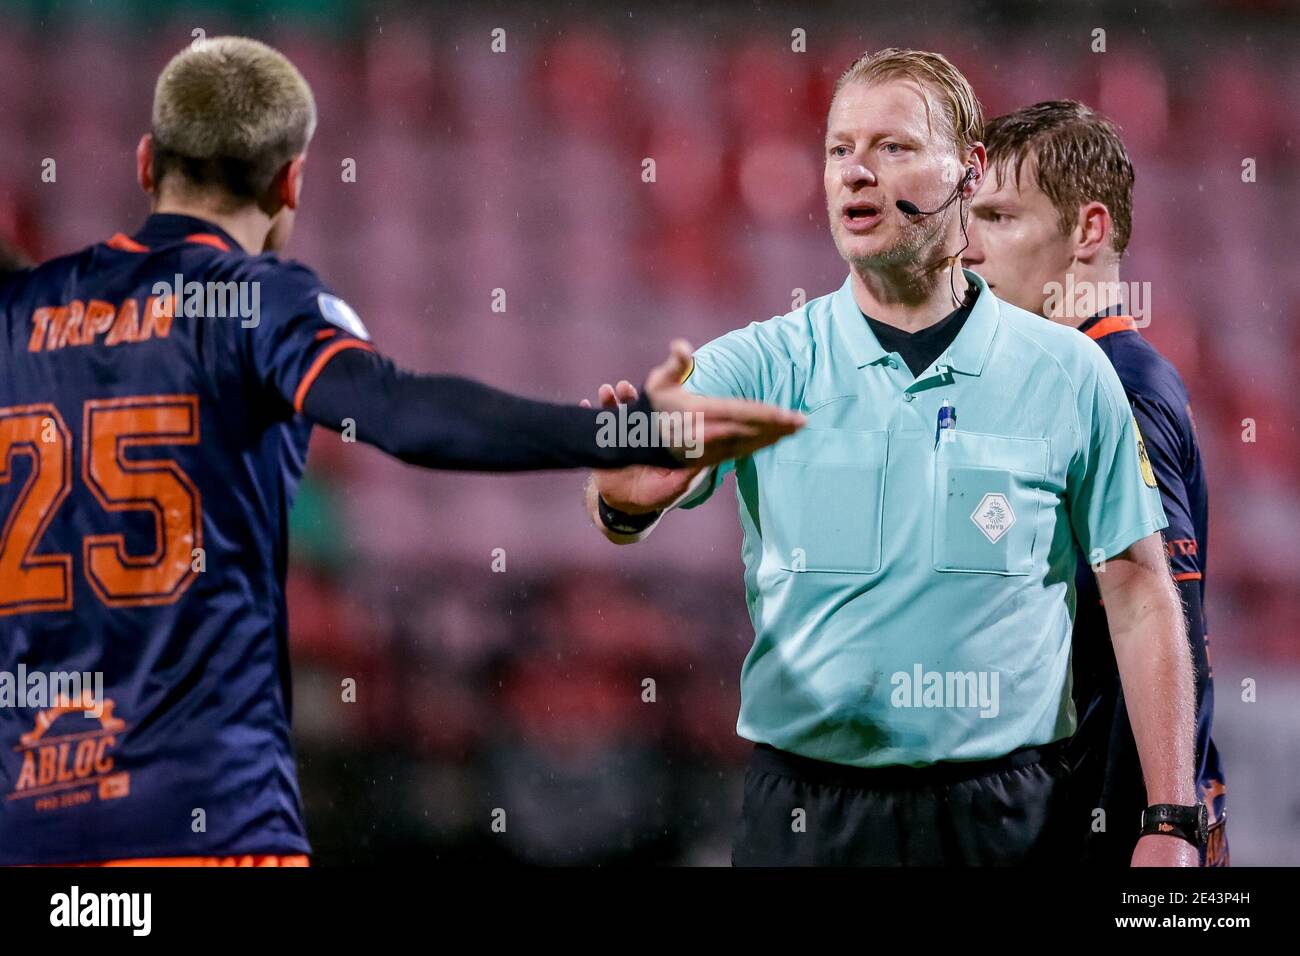 NIJMEGEN, NETHERLANDS - JANUARY 21: (L-R): Mickael Sylvian Tirpan of Fortuna Sittard  in argument with Referee Kevin Blom during the Dutch KNVB Cup ma Stock Photo